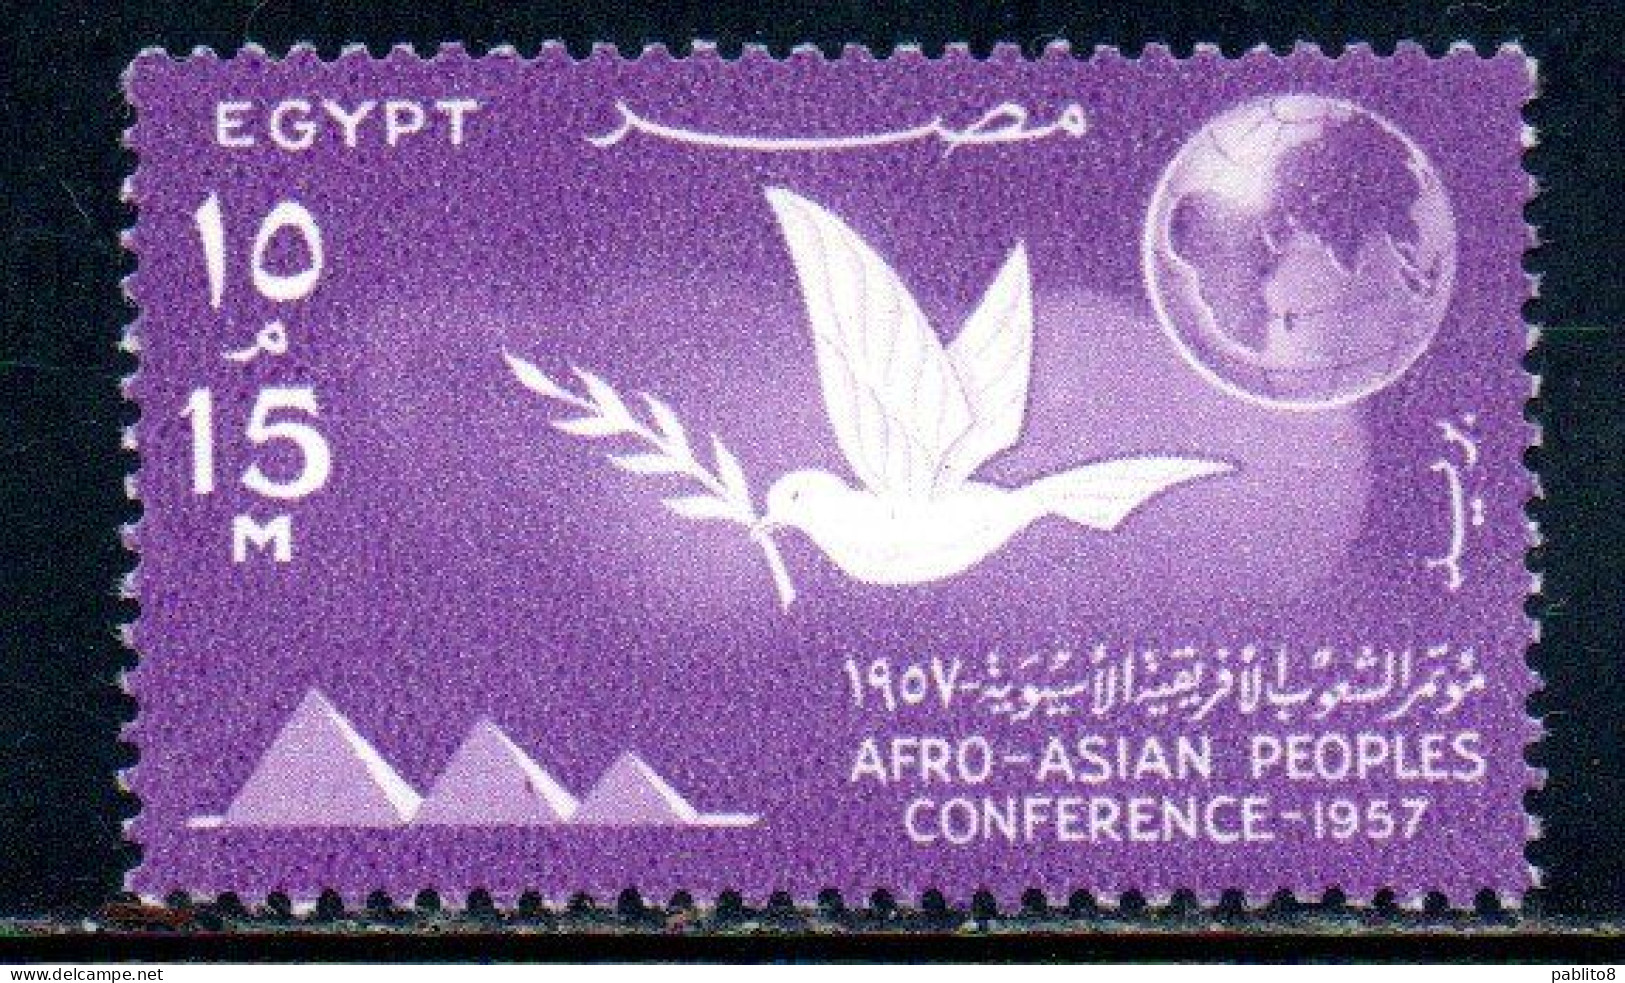 UAR EGYPT EGITTO 1957 AFRO-ASIAN PEOPLES CONFERENCE CAIRO PYRAMIDS DOVE AND GLOBE 15m MNH - Ungebraucht